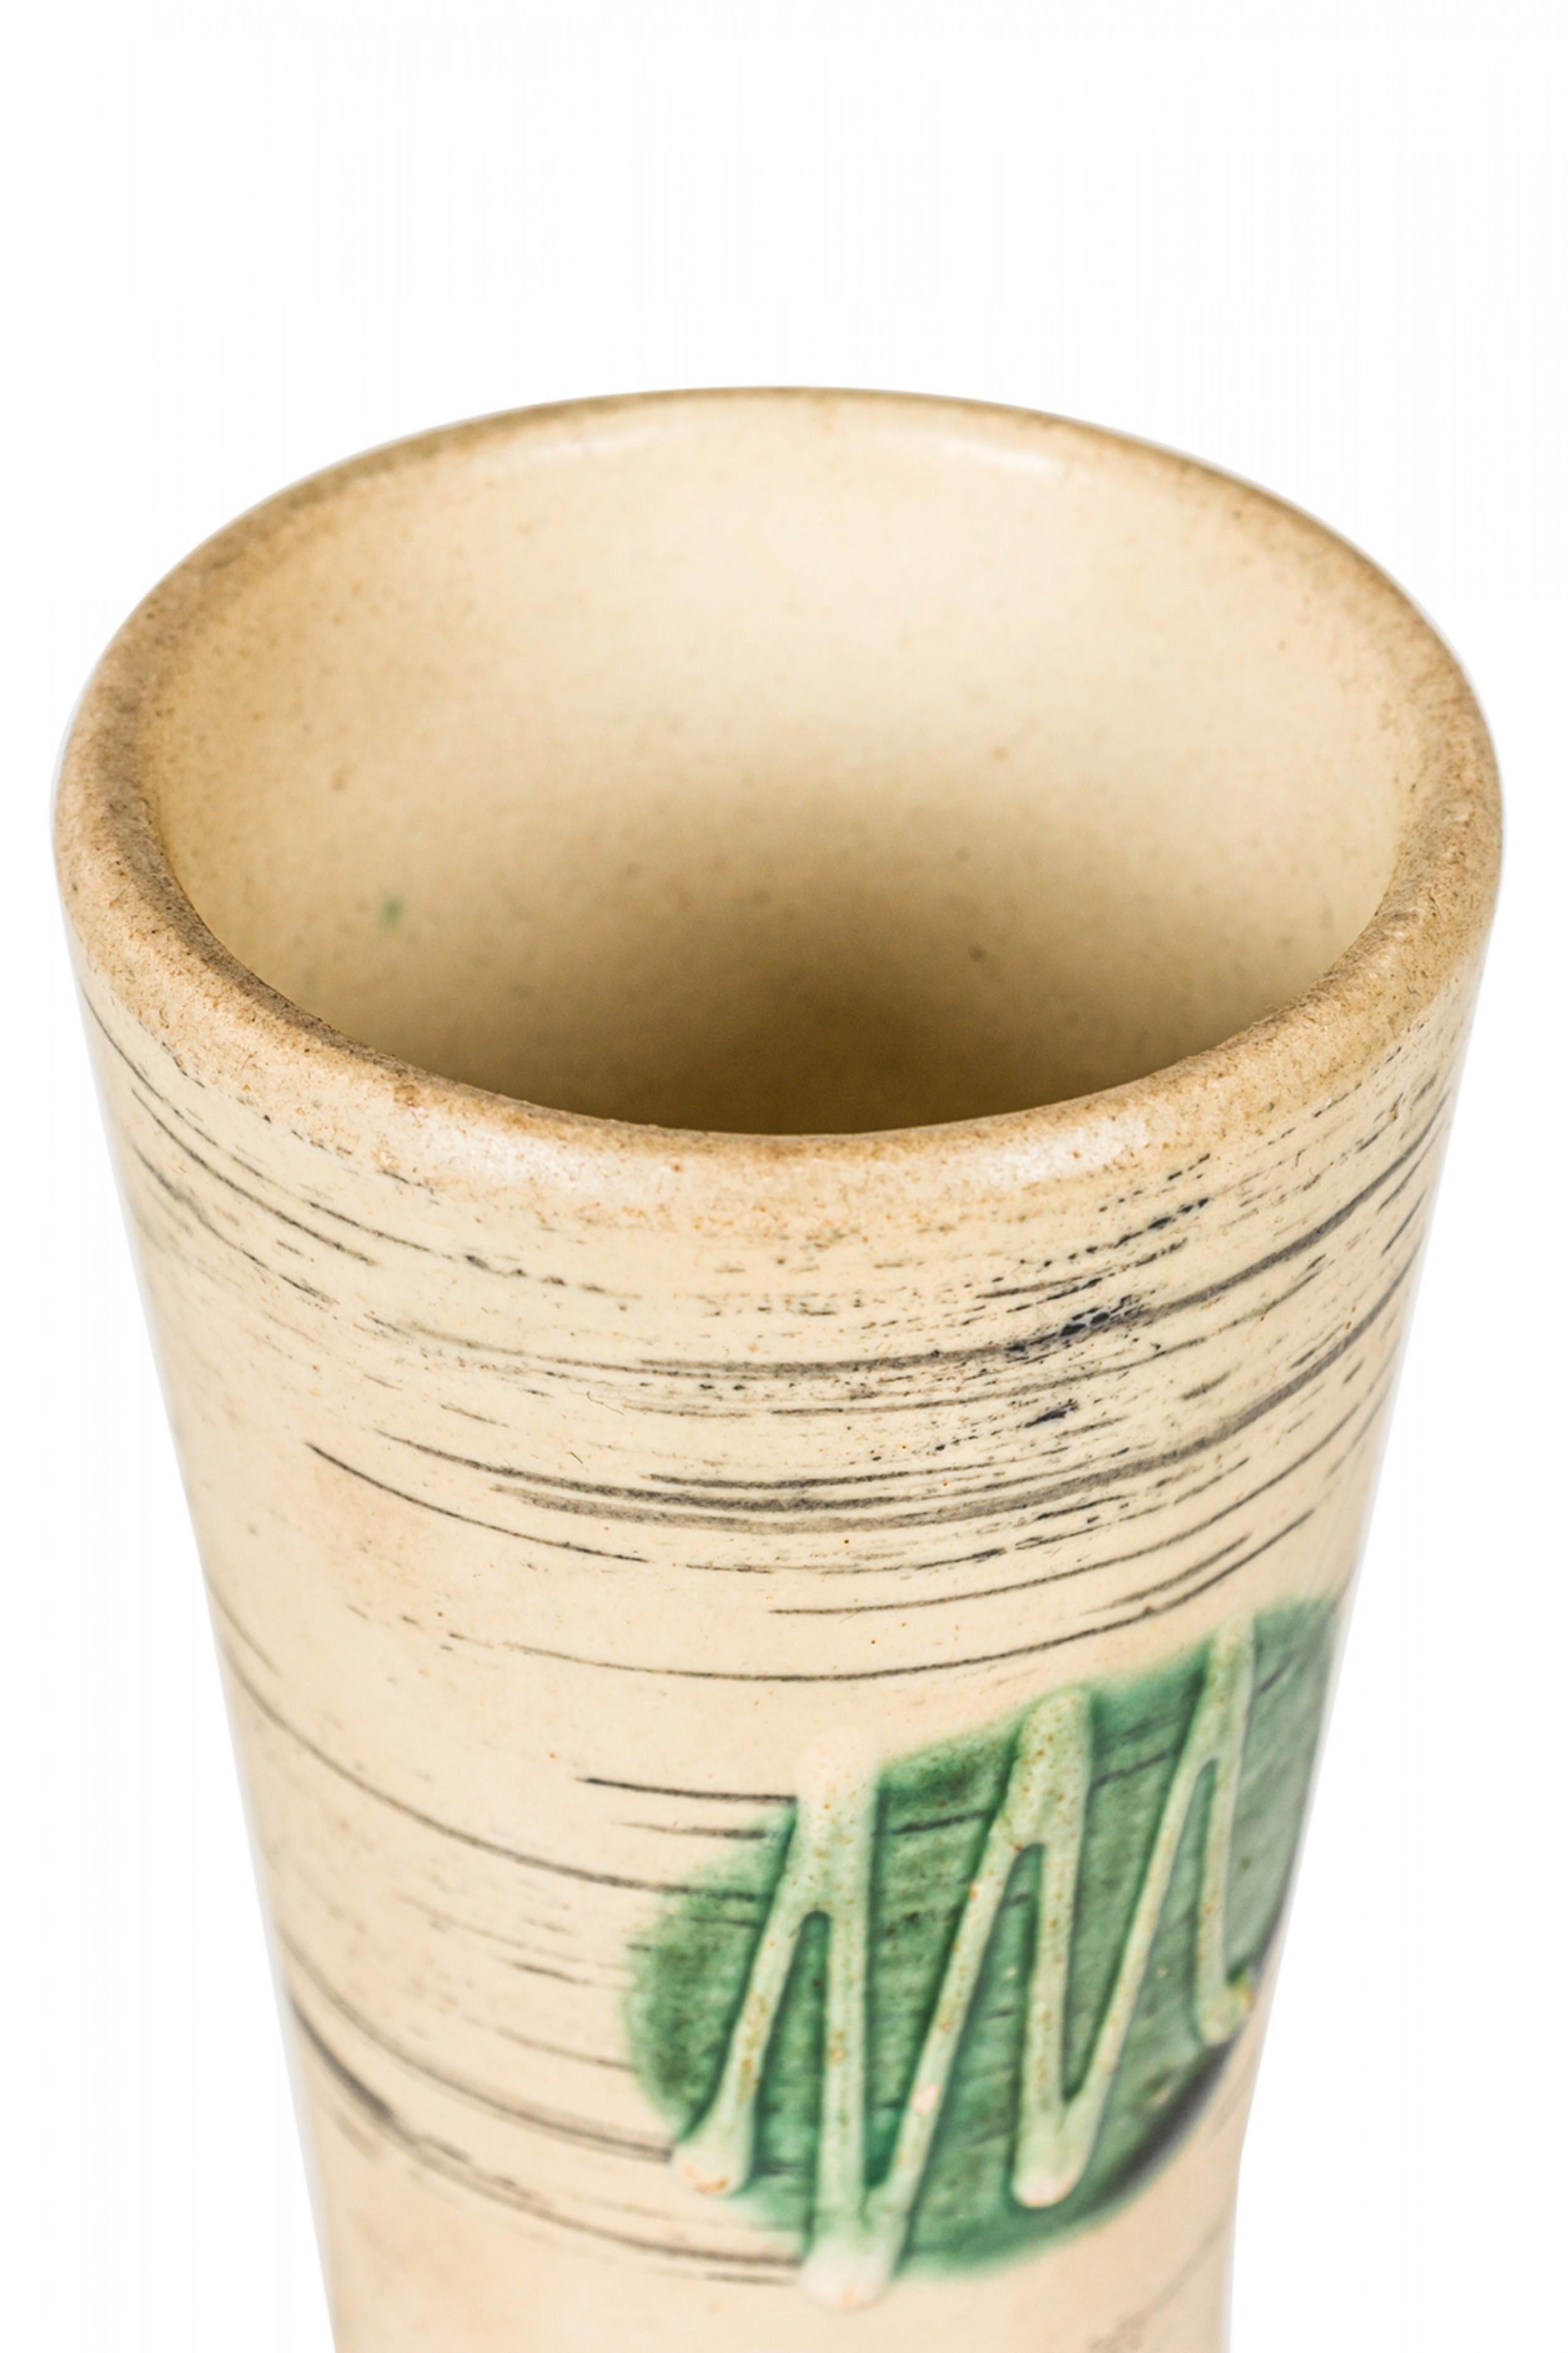 West German Mid-Century hourglass-form ceramic vase with organic thin horizontal black lines interspersed with large green circles centering raised zig zag designs against a beige glazed ground. (mark on bottom, W. GERMANY 654-25).